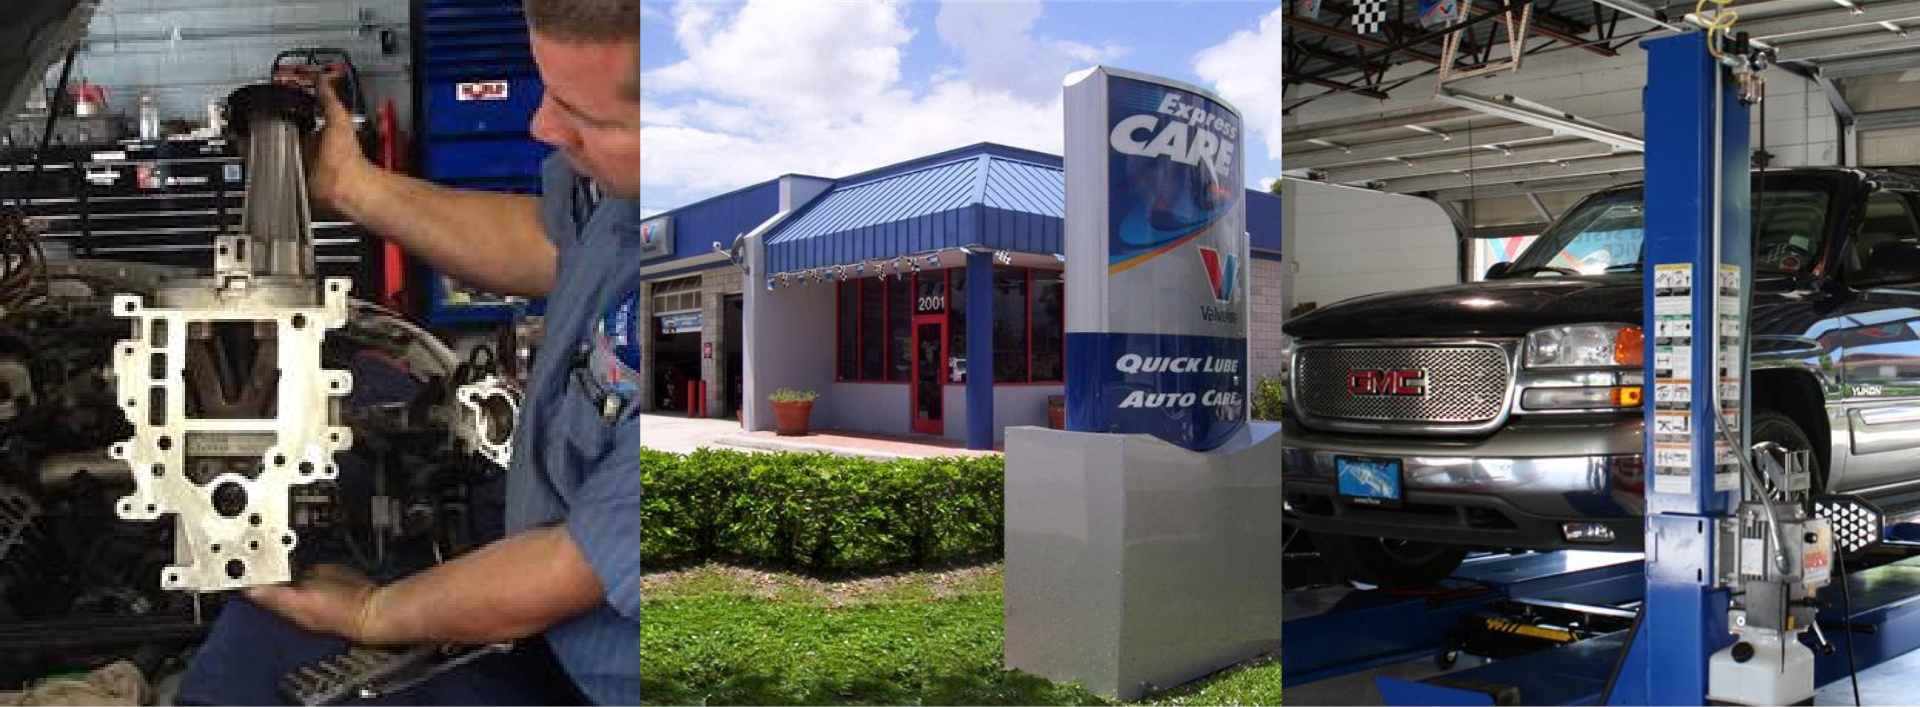 Express Care Quick Lube Of Fort Pierce